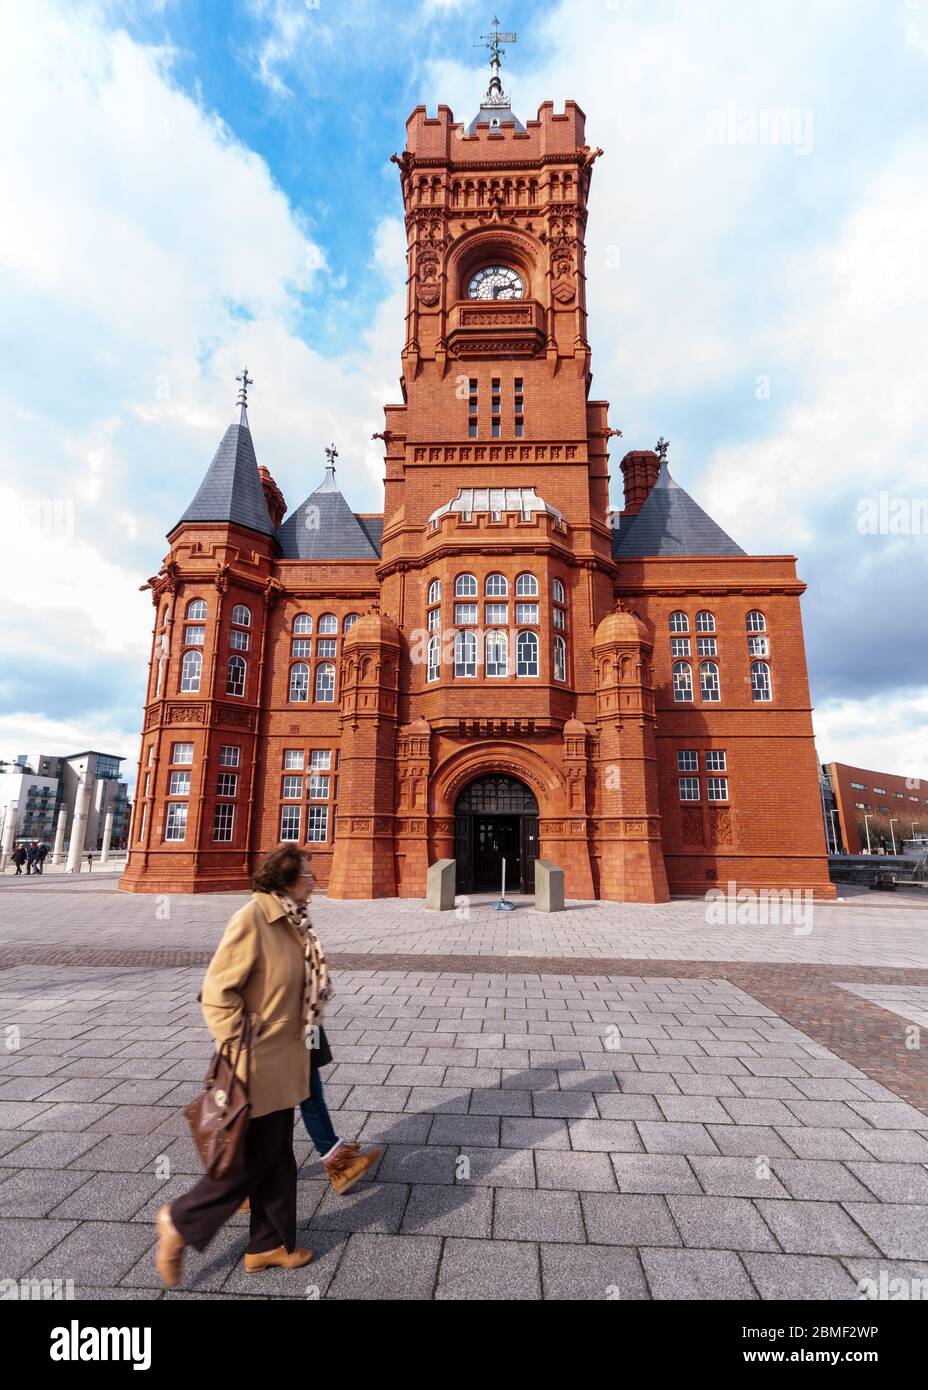 Cardiff, Wales, UK - March 17, 2013: Pedestrians walk past the ornate Victorian Pierhead building in Cardiff Bay. Stock Photo